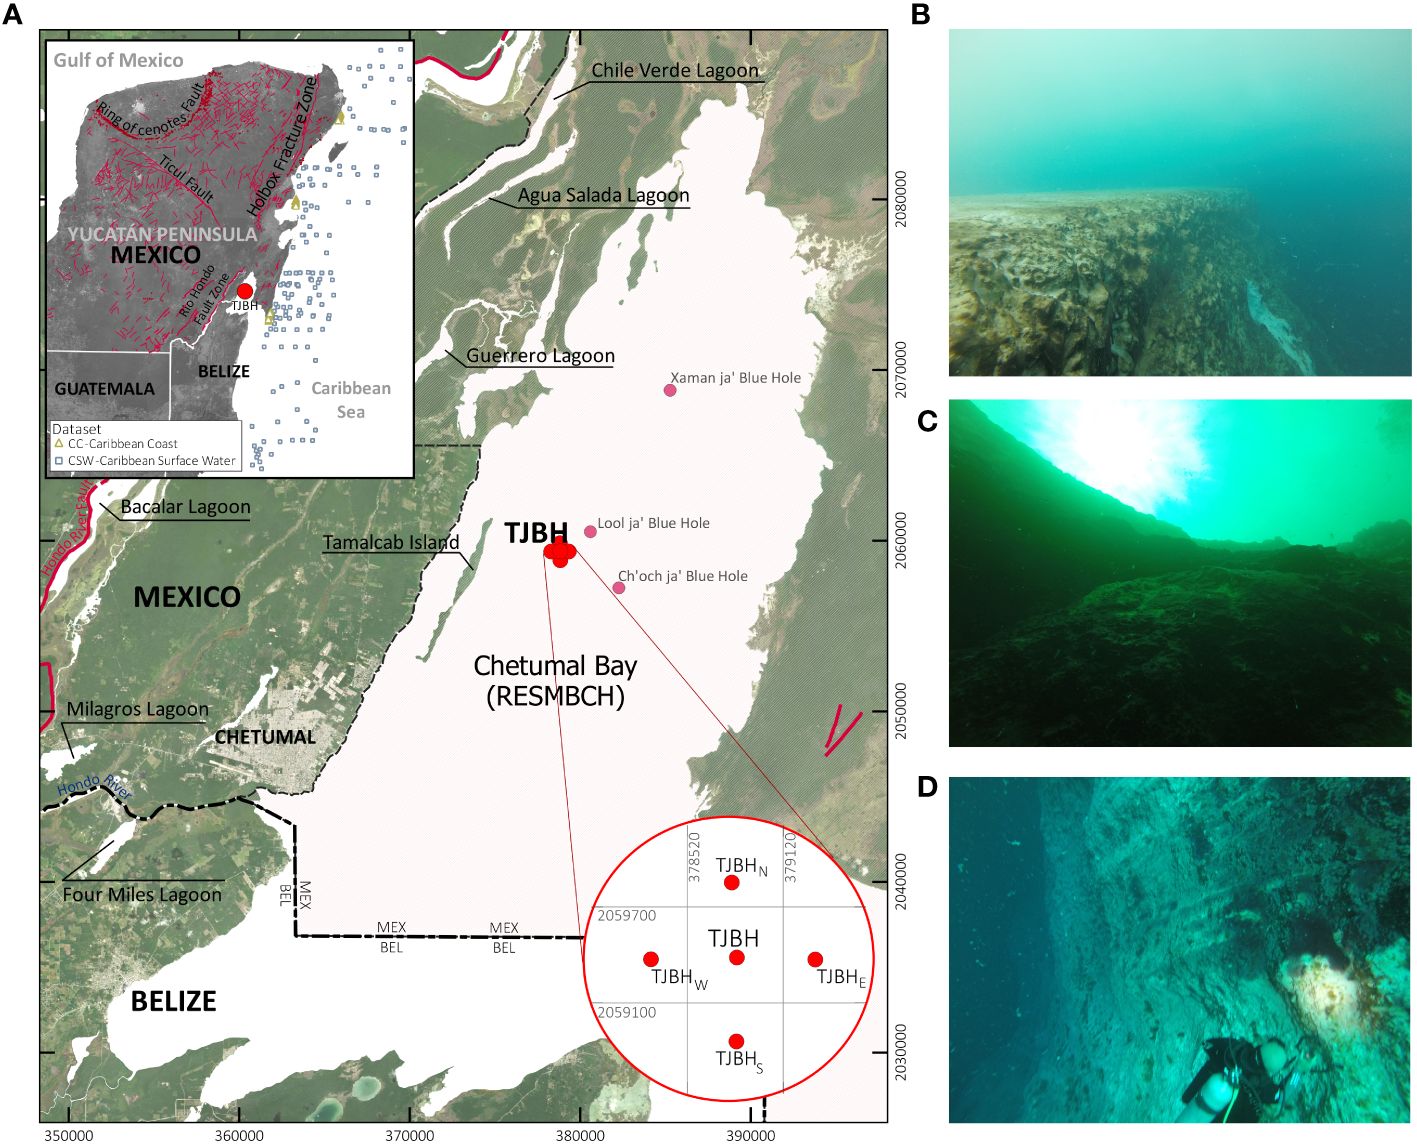 A map showing the location of the Taam Ja' blue hole and underwater pictures of the blue hole.